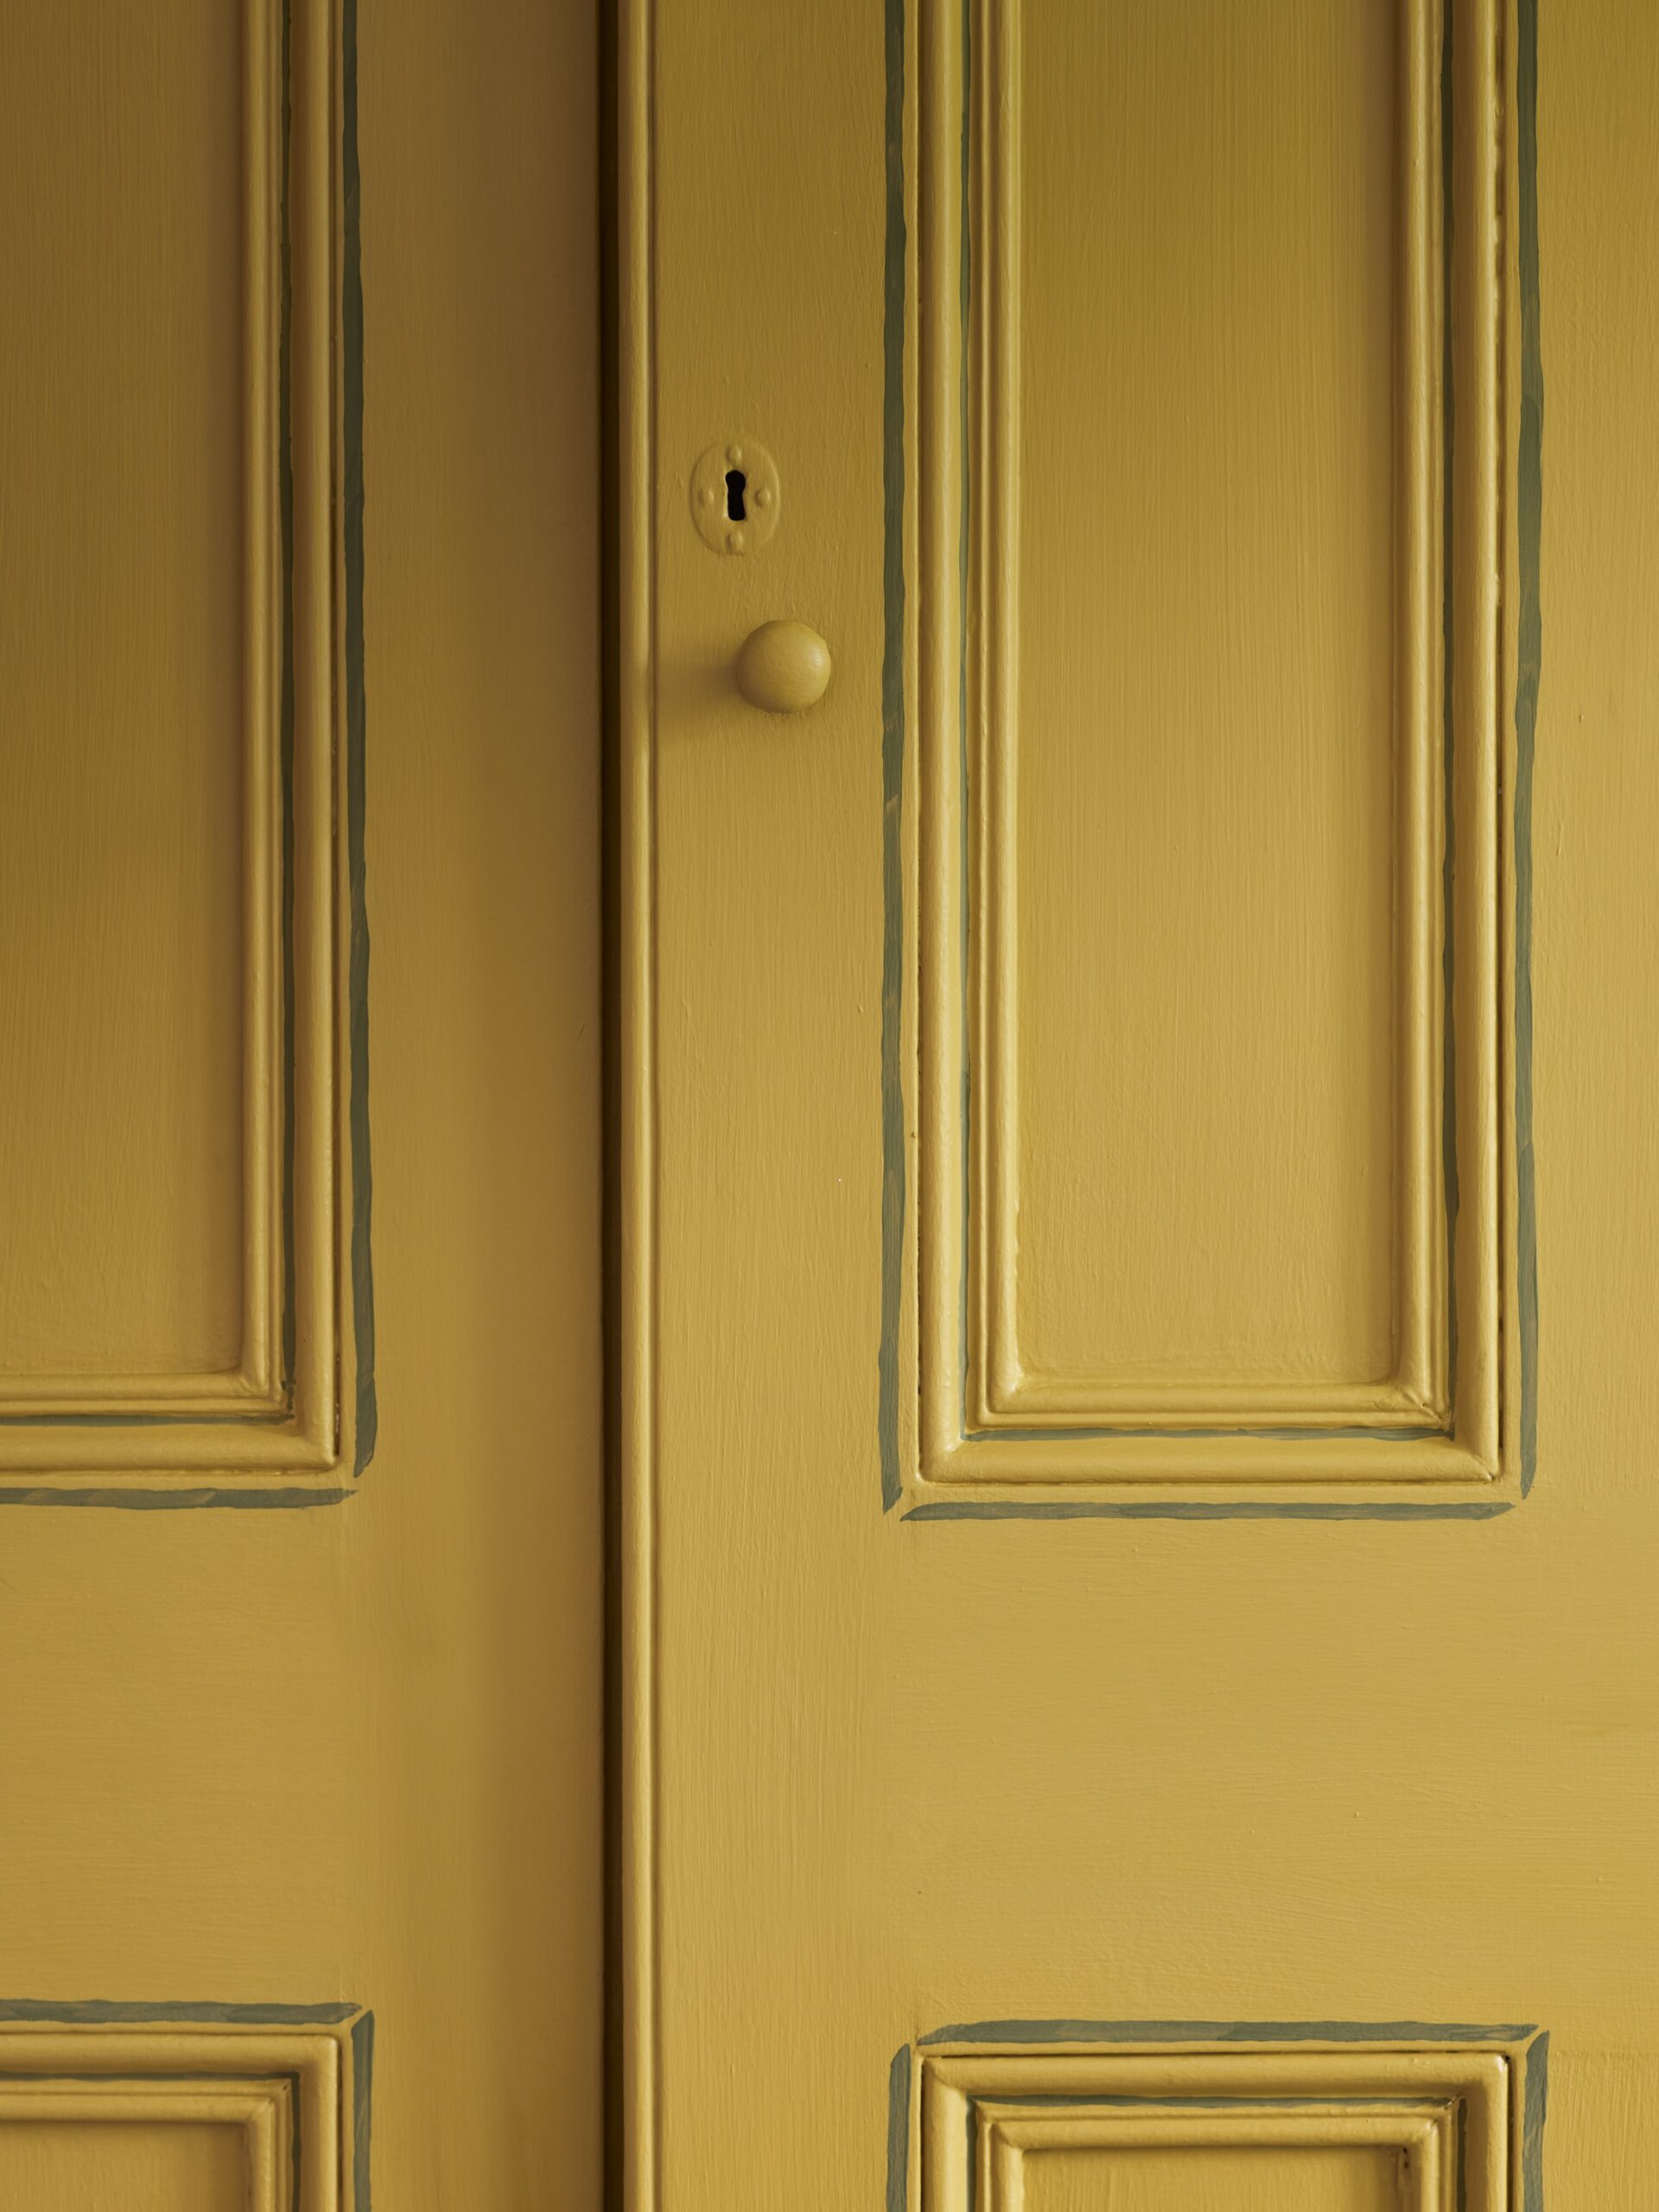 https://www.anniesloan.com/us/wp-content/uploads/sites/7/2022/03/Annie-Sloan-Bedroom-Satin-Paint-in-Carnaby-Yellow-Chalk-Paint-in-Olive-Lifestyle-Portrait-scaled.jpg